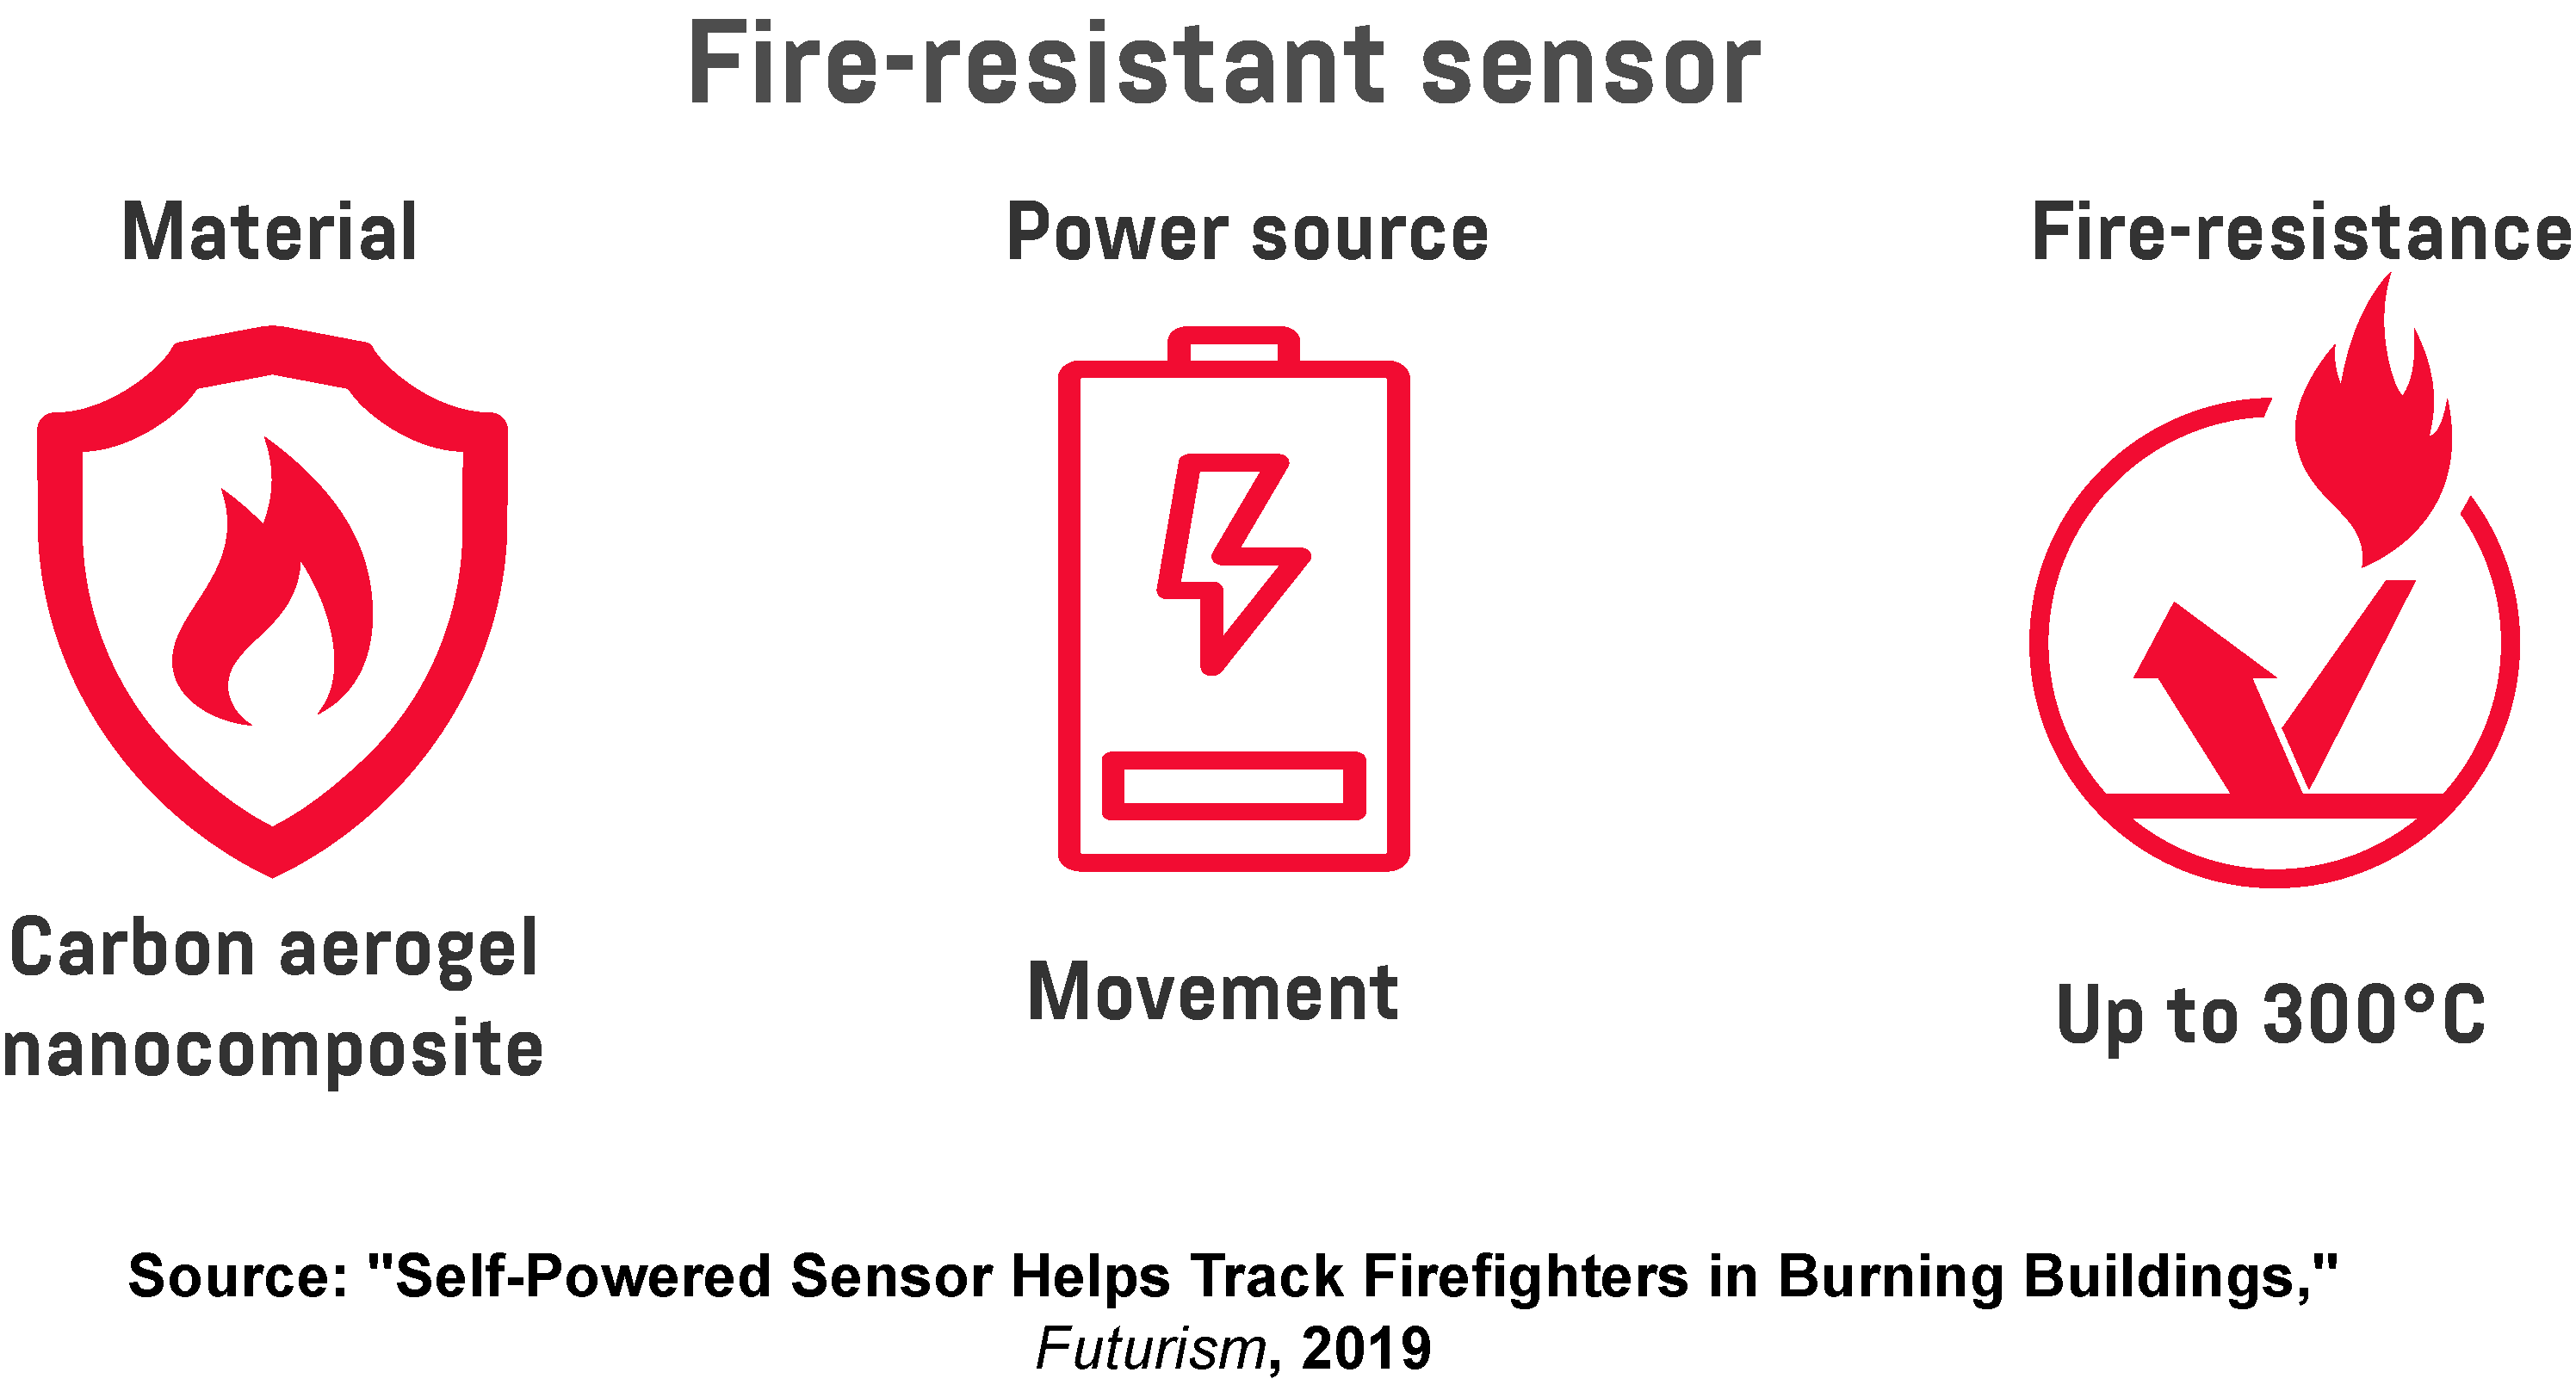  Infographic showing the key characteristics of a new fire-resistant sensor.